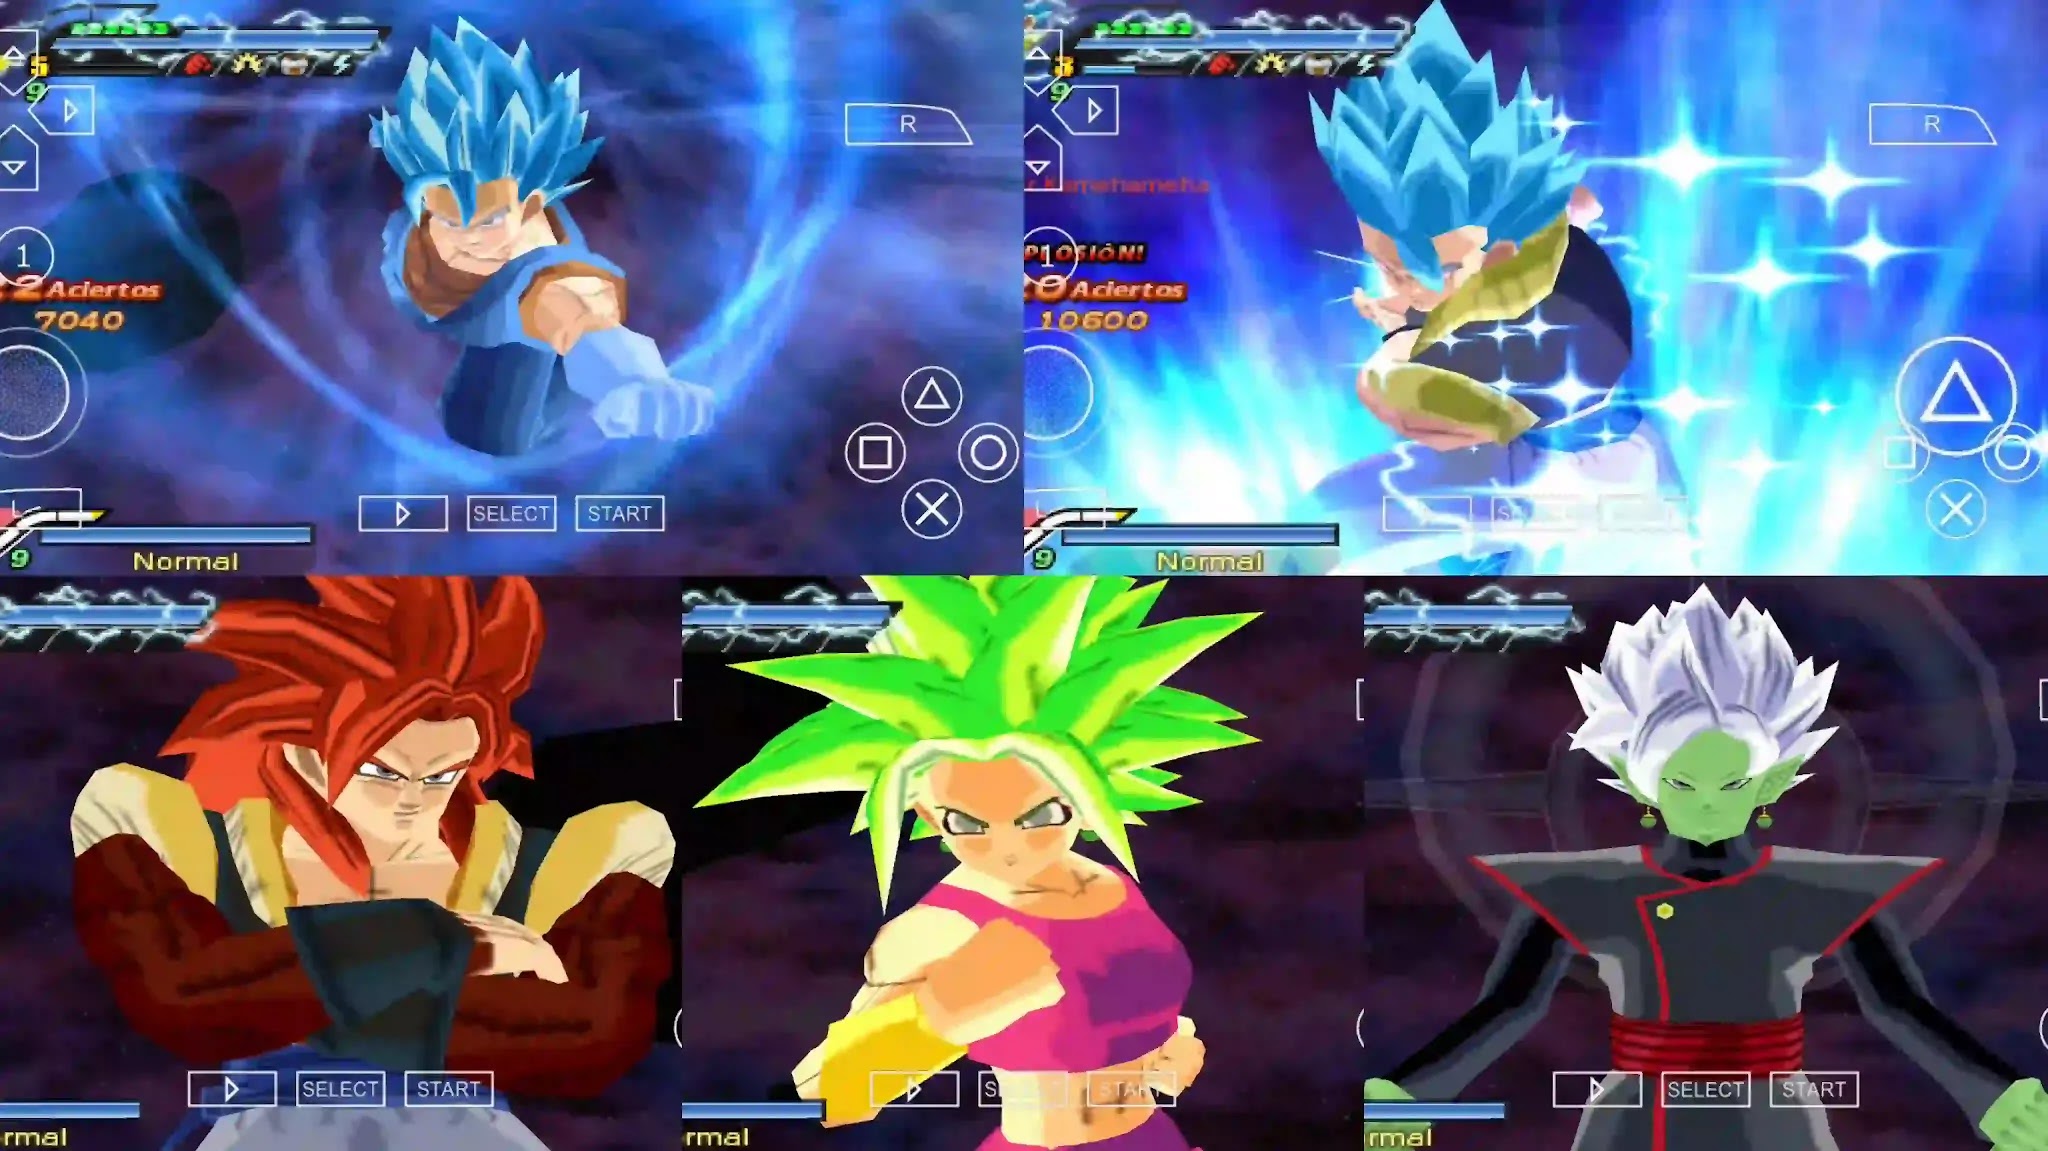 Dragon Ball Super Budokai Heroes Tenkaichi 3 [Permanent Menu] PSP PPSSPP  ISO For Android & PPSSPP Settings - MovGameZone - Android Game PSP ISO  PPSSPP Games, PPSSPP Mod Games and PPSSPP Settings.